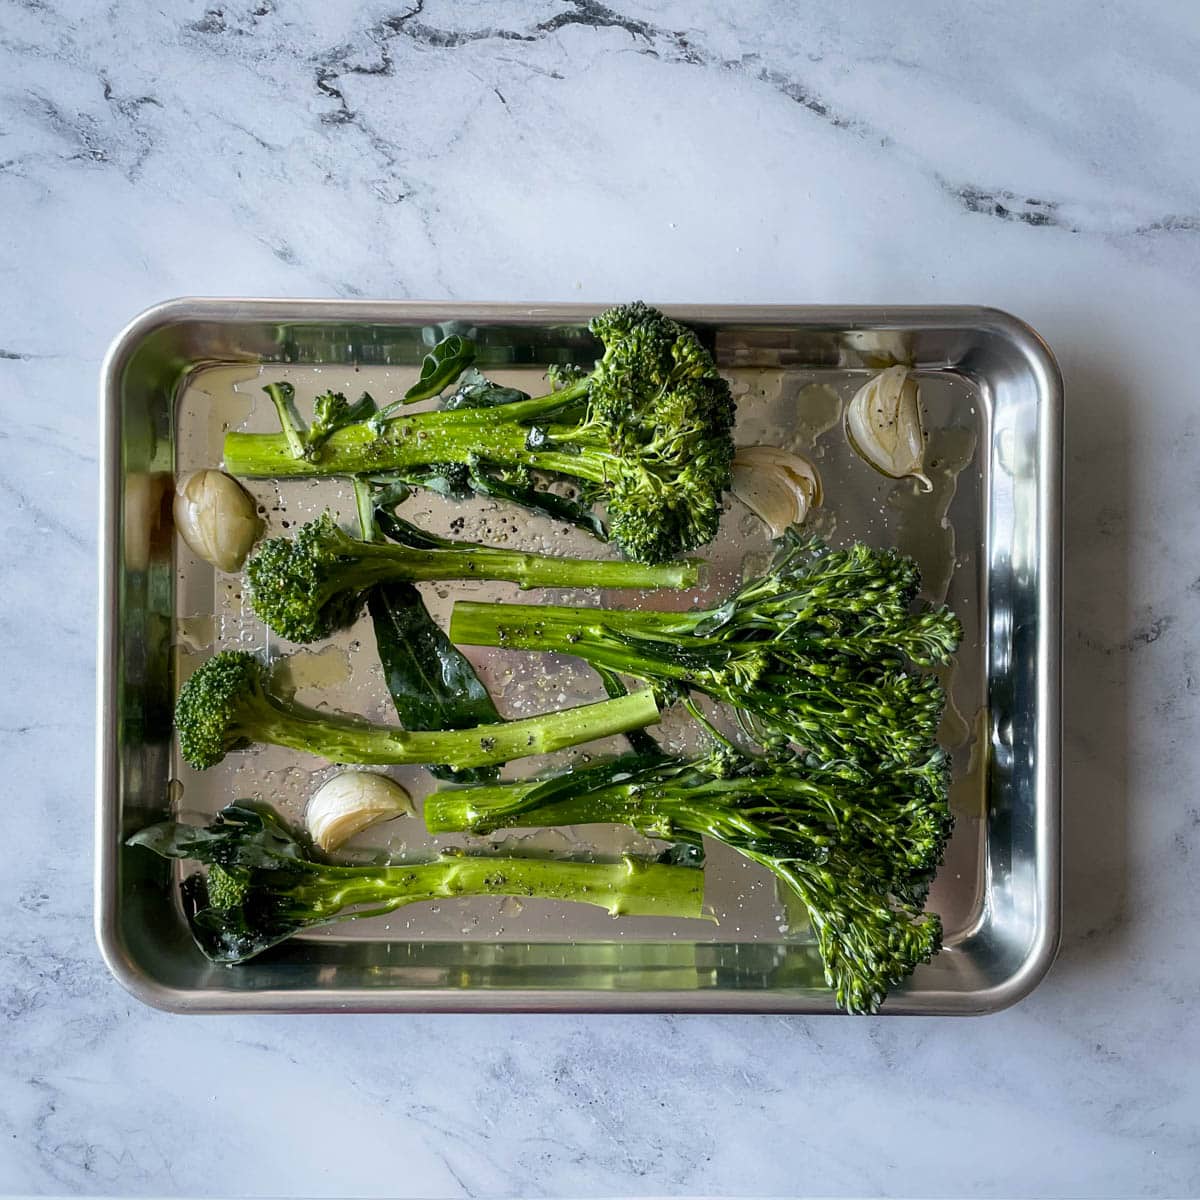 Tenderstem broccoli and garlic cloves in their skin sit on a quarter sheet pan drizzled with olive oil, salt, and pepper.